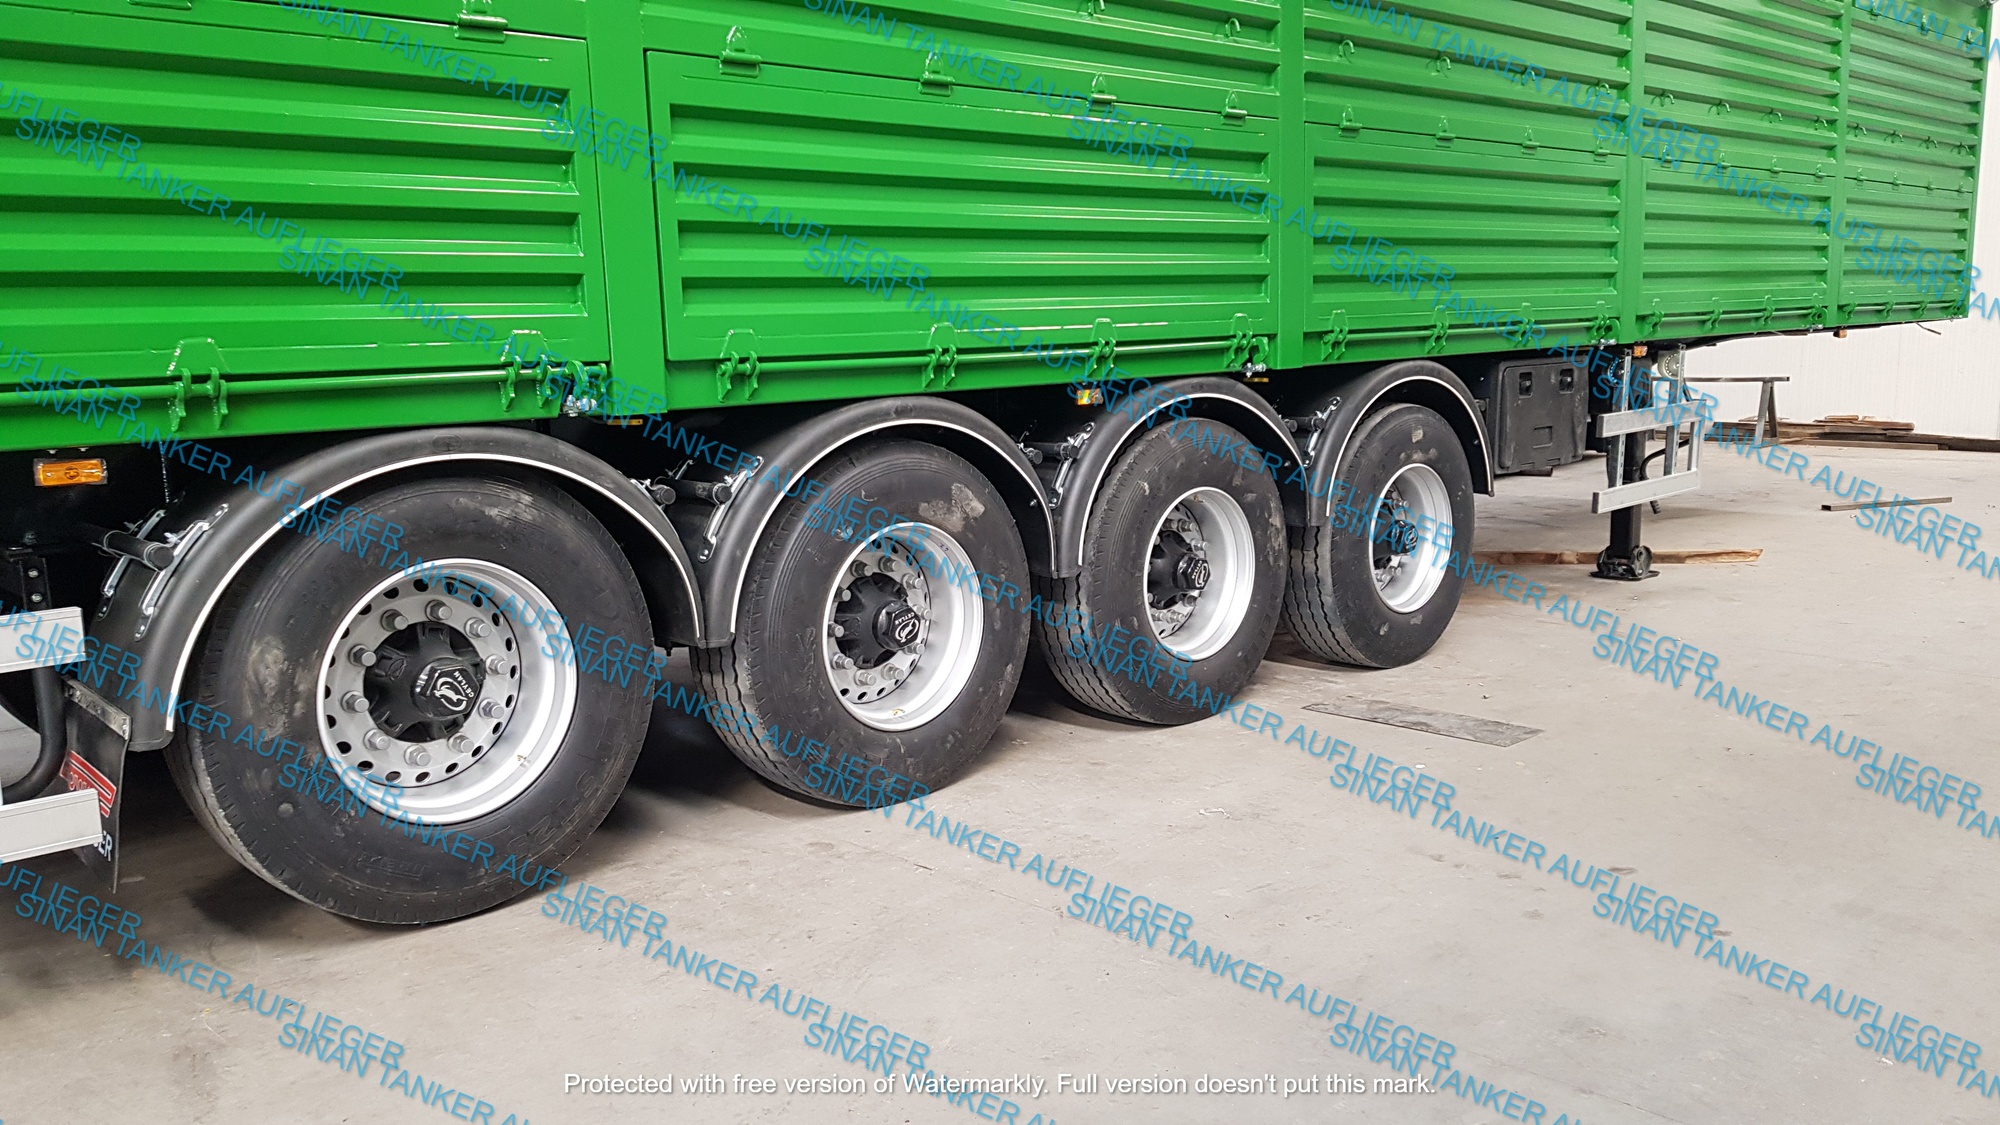 SİNANLI TANKER - TRAILER undefined: photos 3